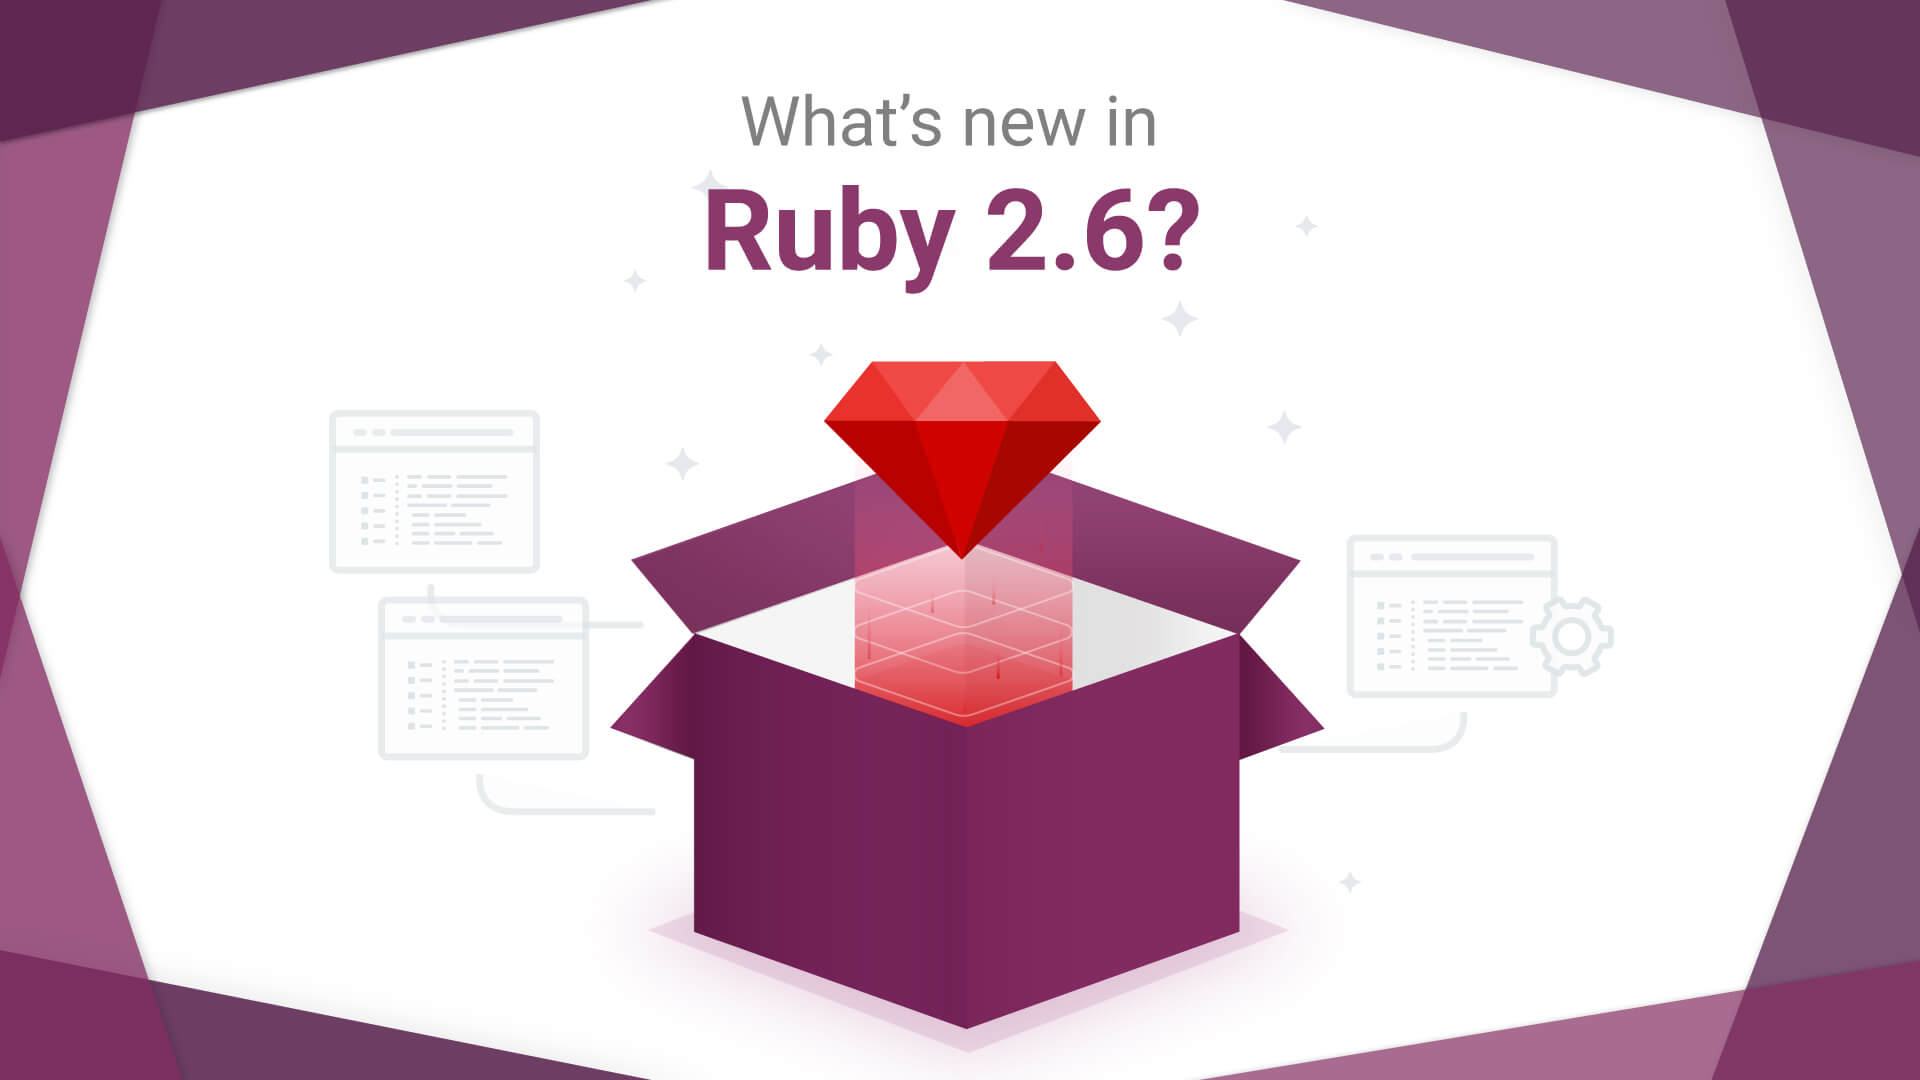 A quick dive into Ruby 2.6. What is new? - Image